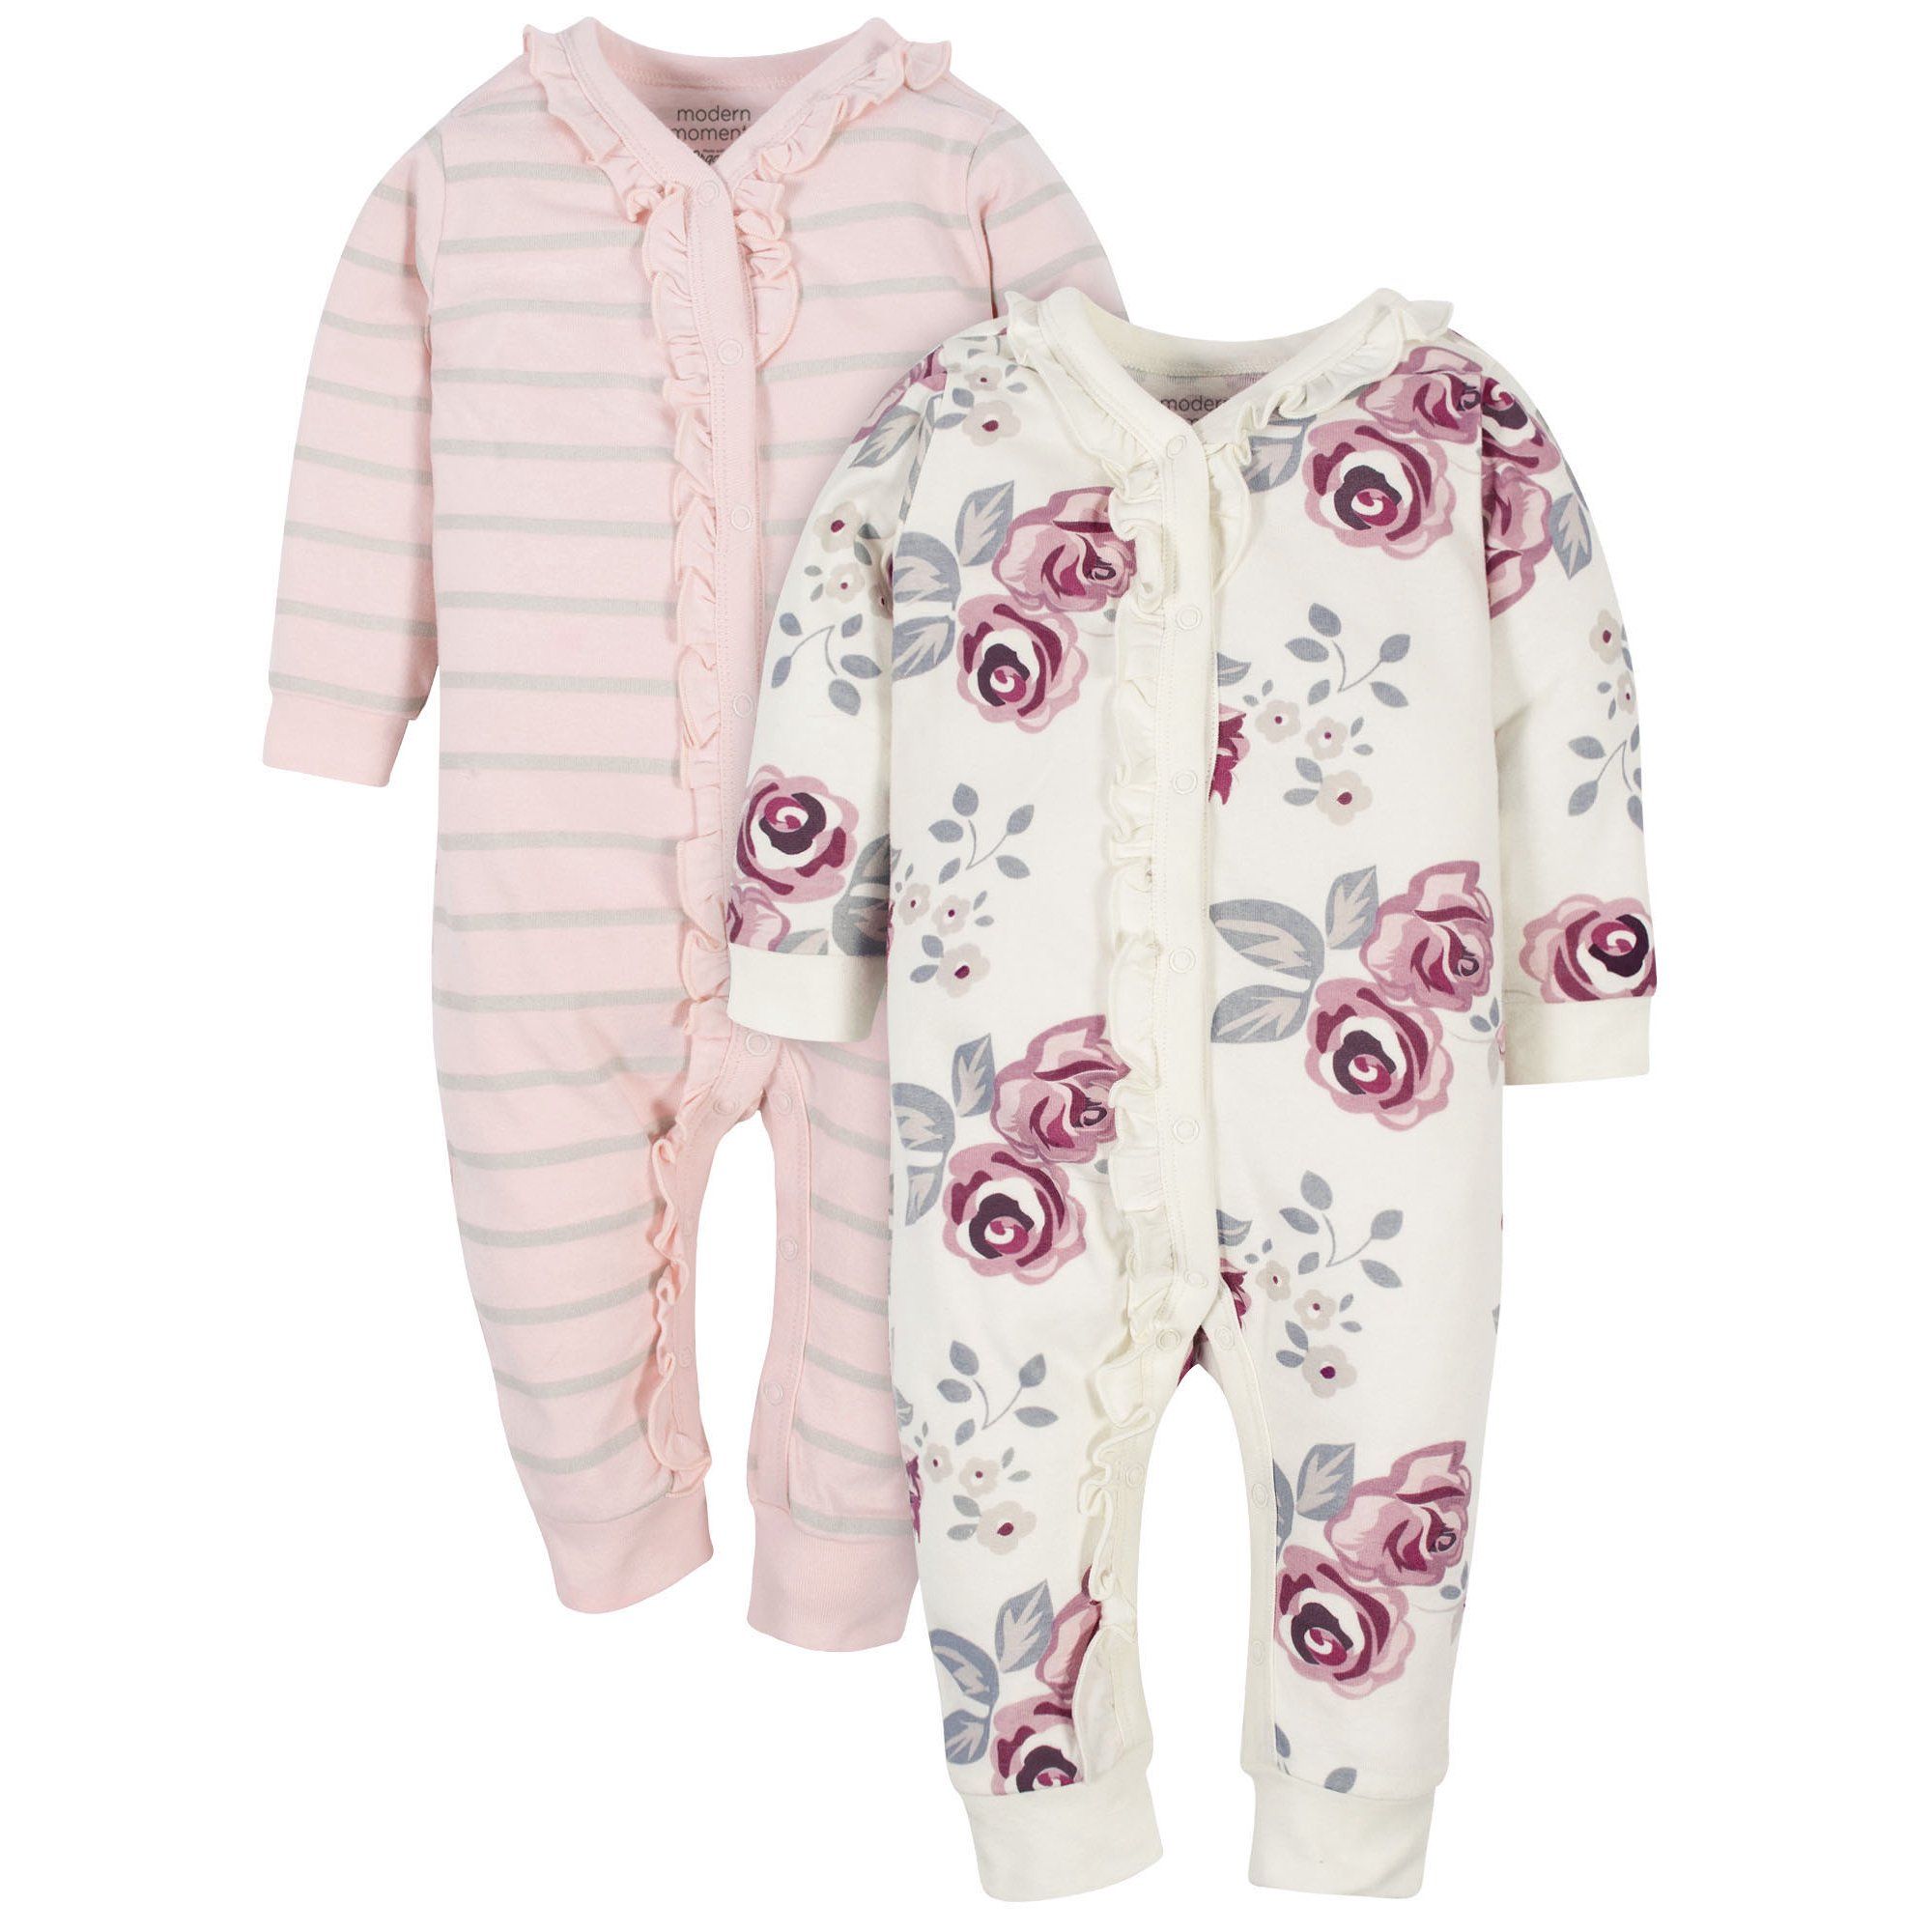 Modern Moments by Gerber Baby Girl Coveralls, 2-Pack | Walmart (US)